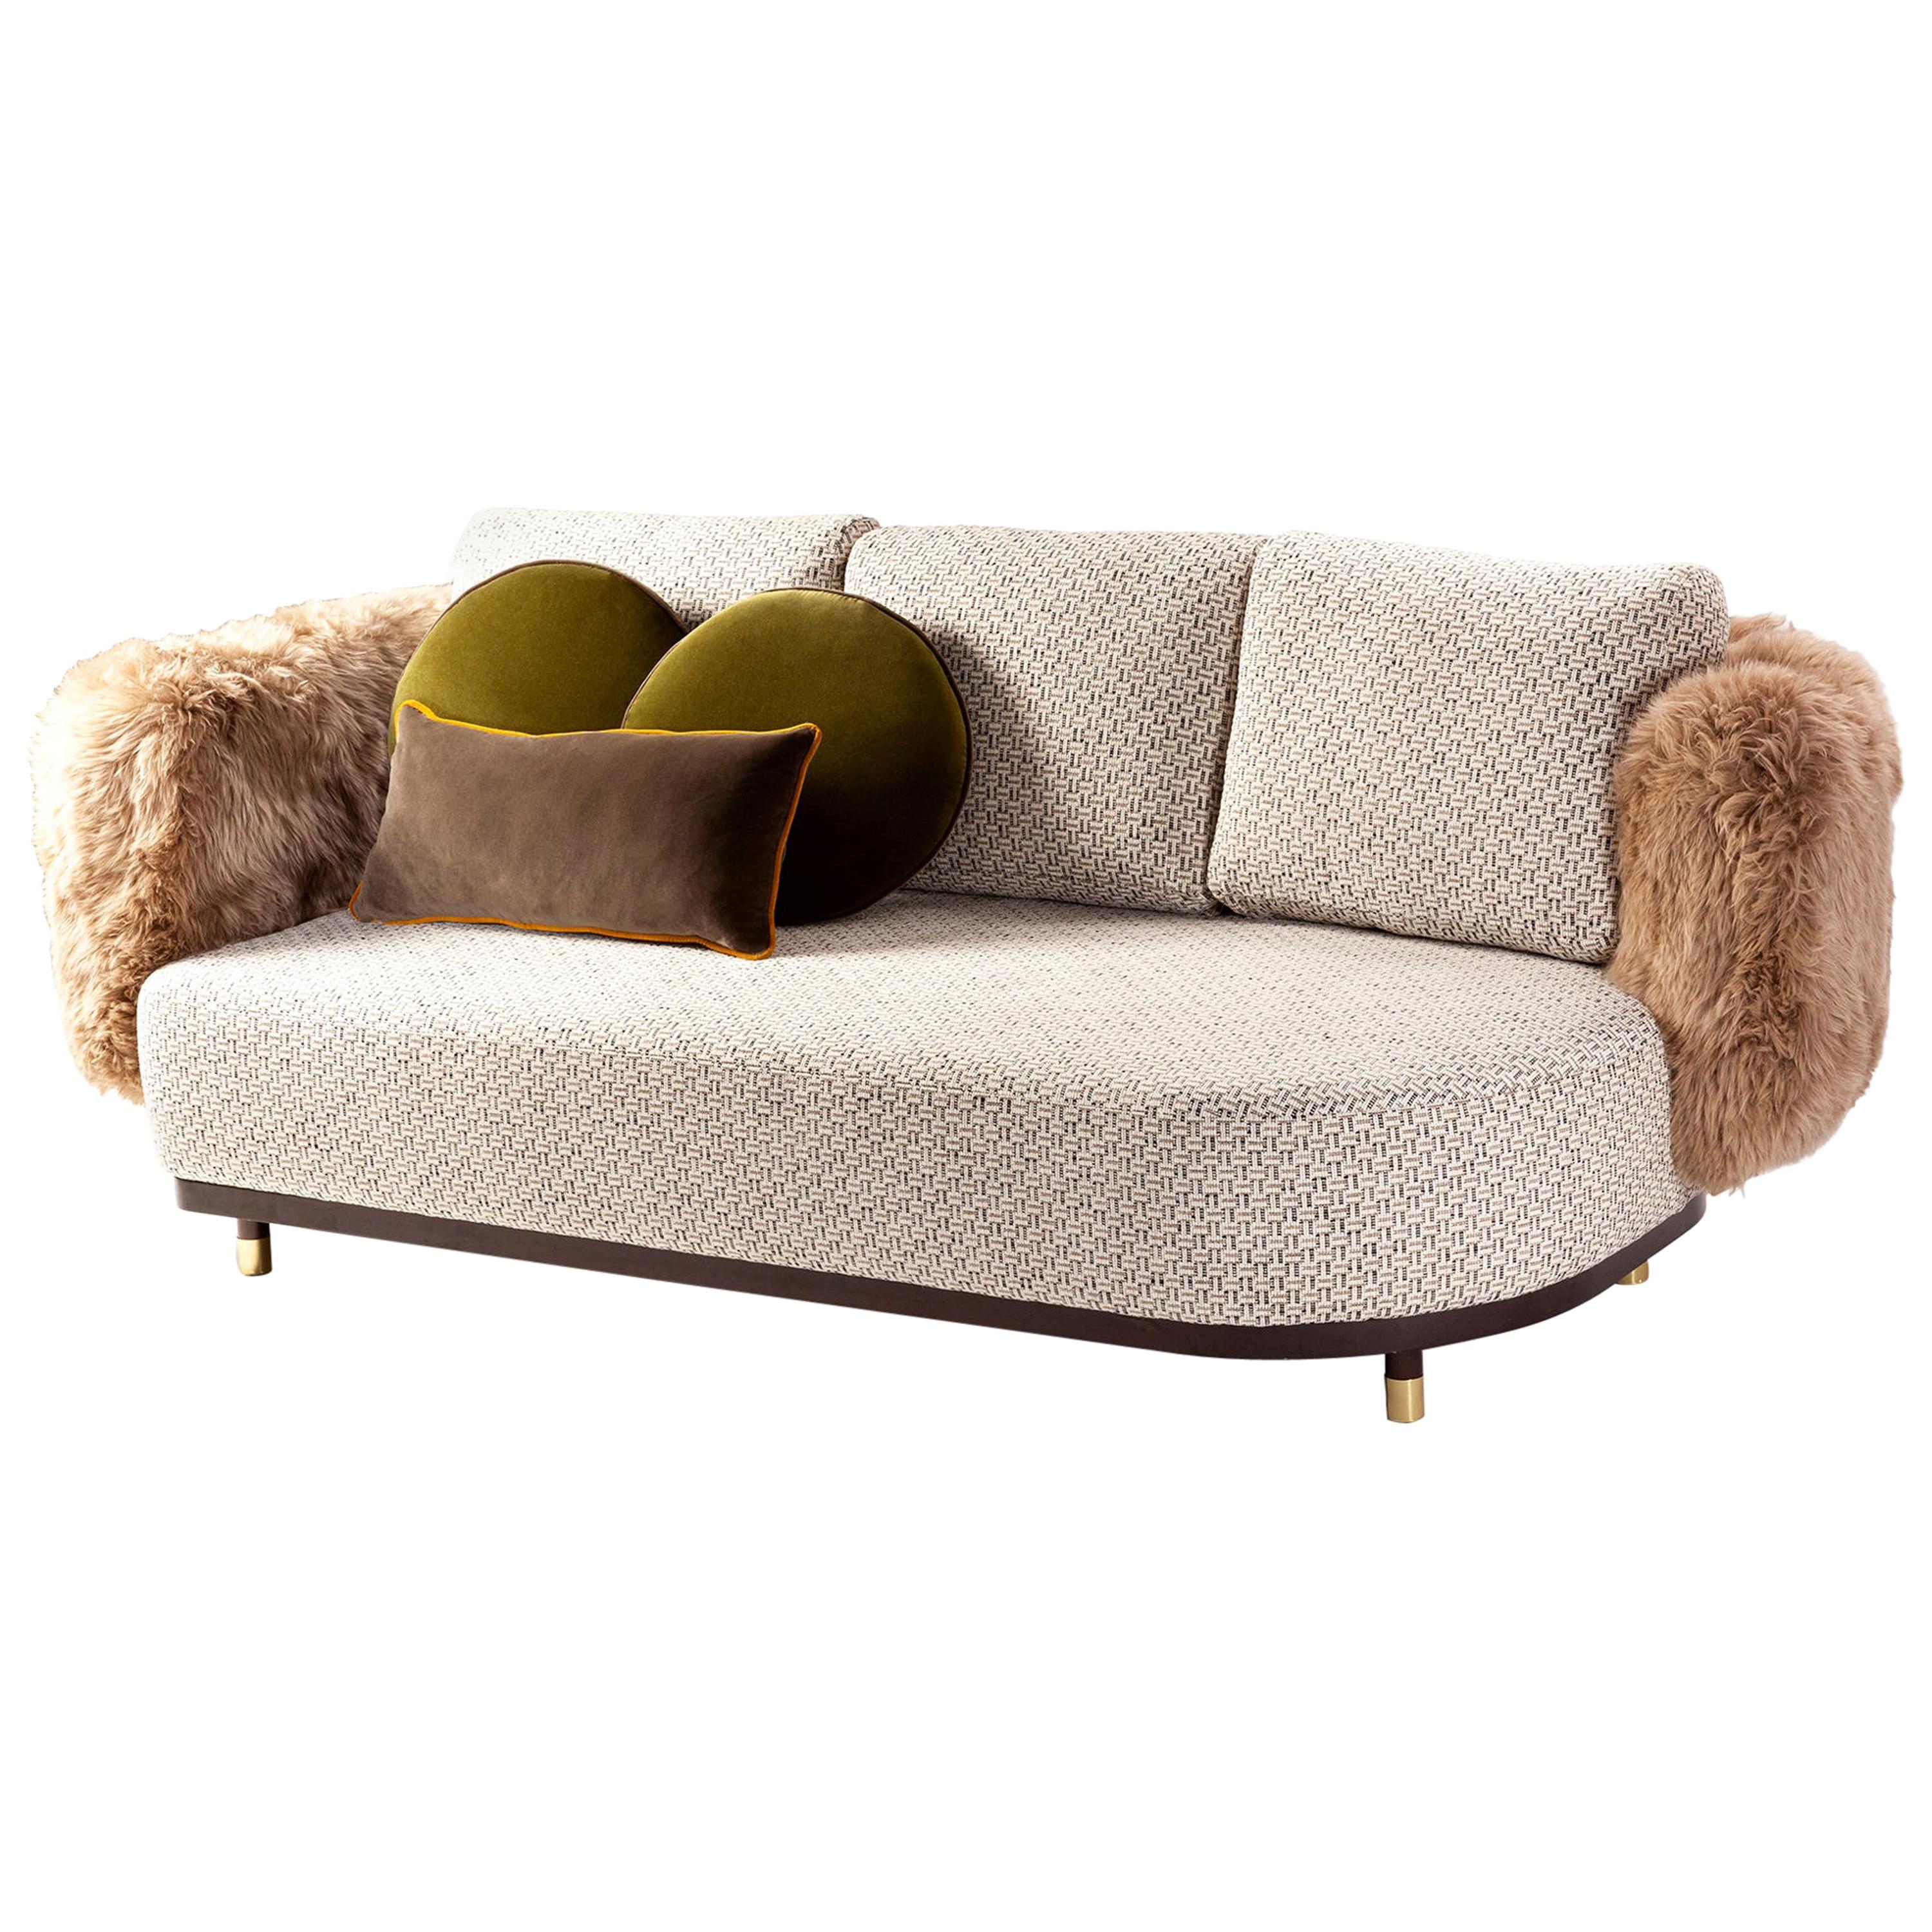 Sofa Settee with Weaved Texture and Lamb Fur Single Man For Sale